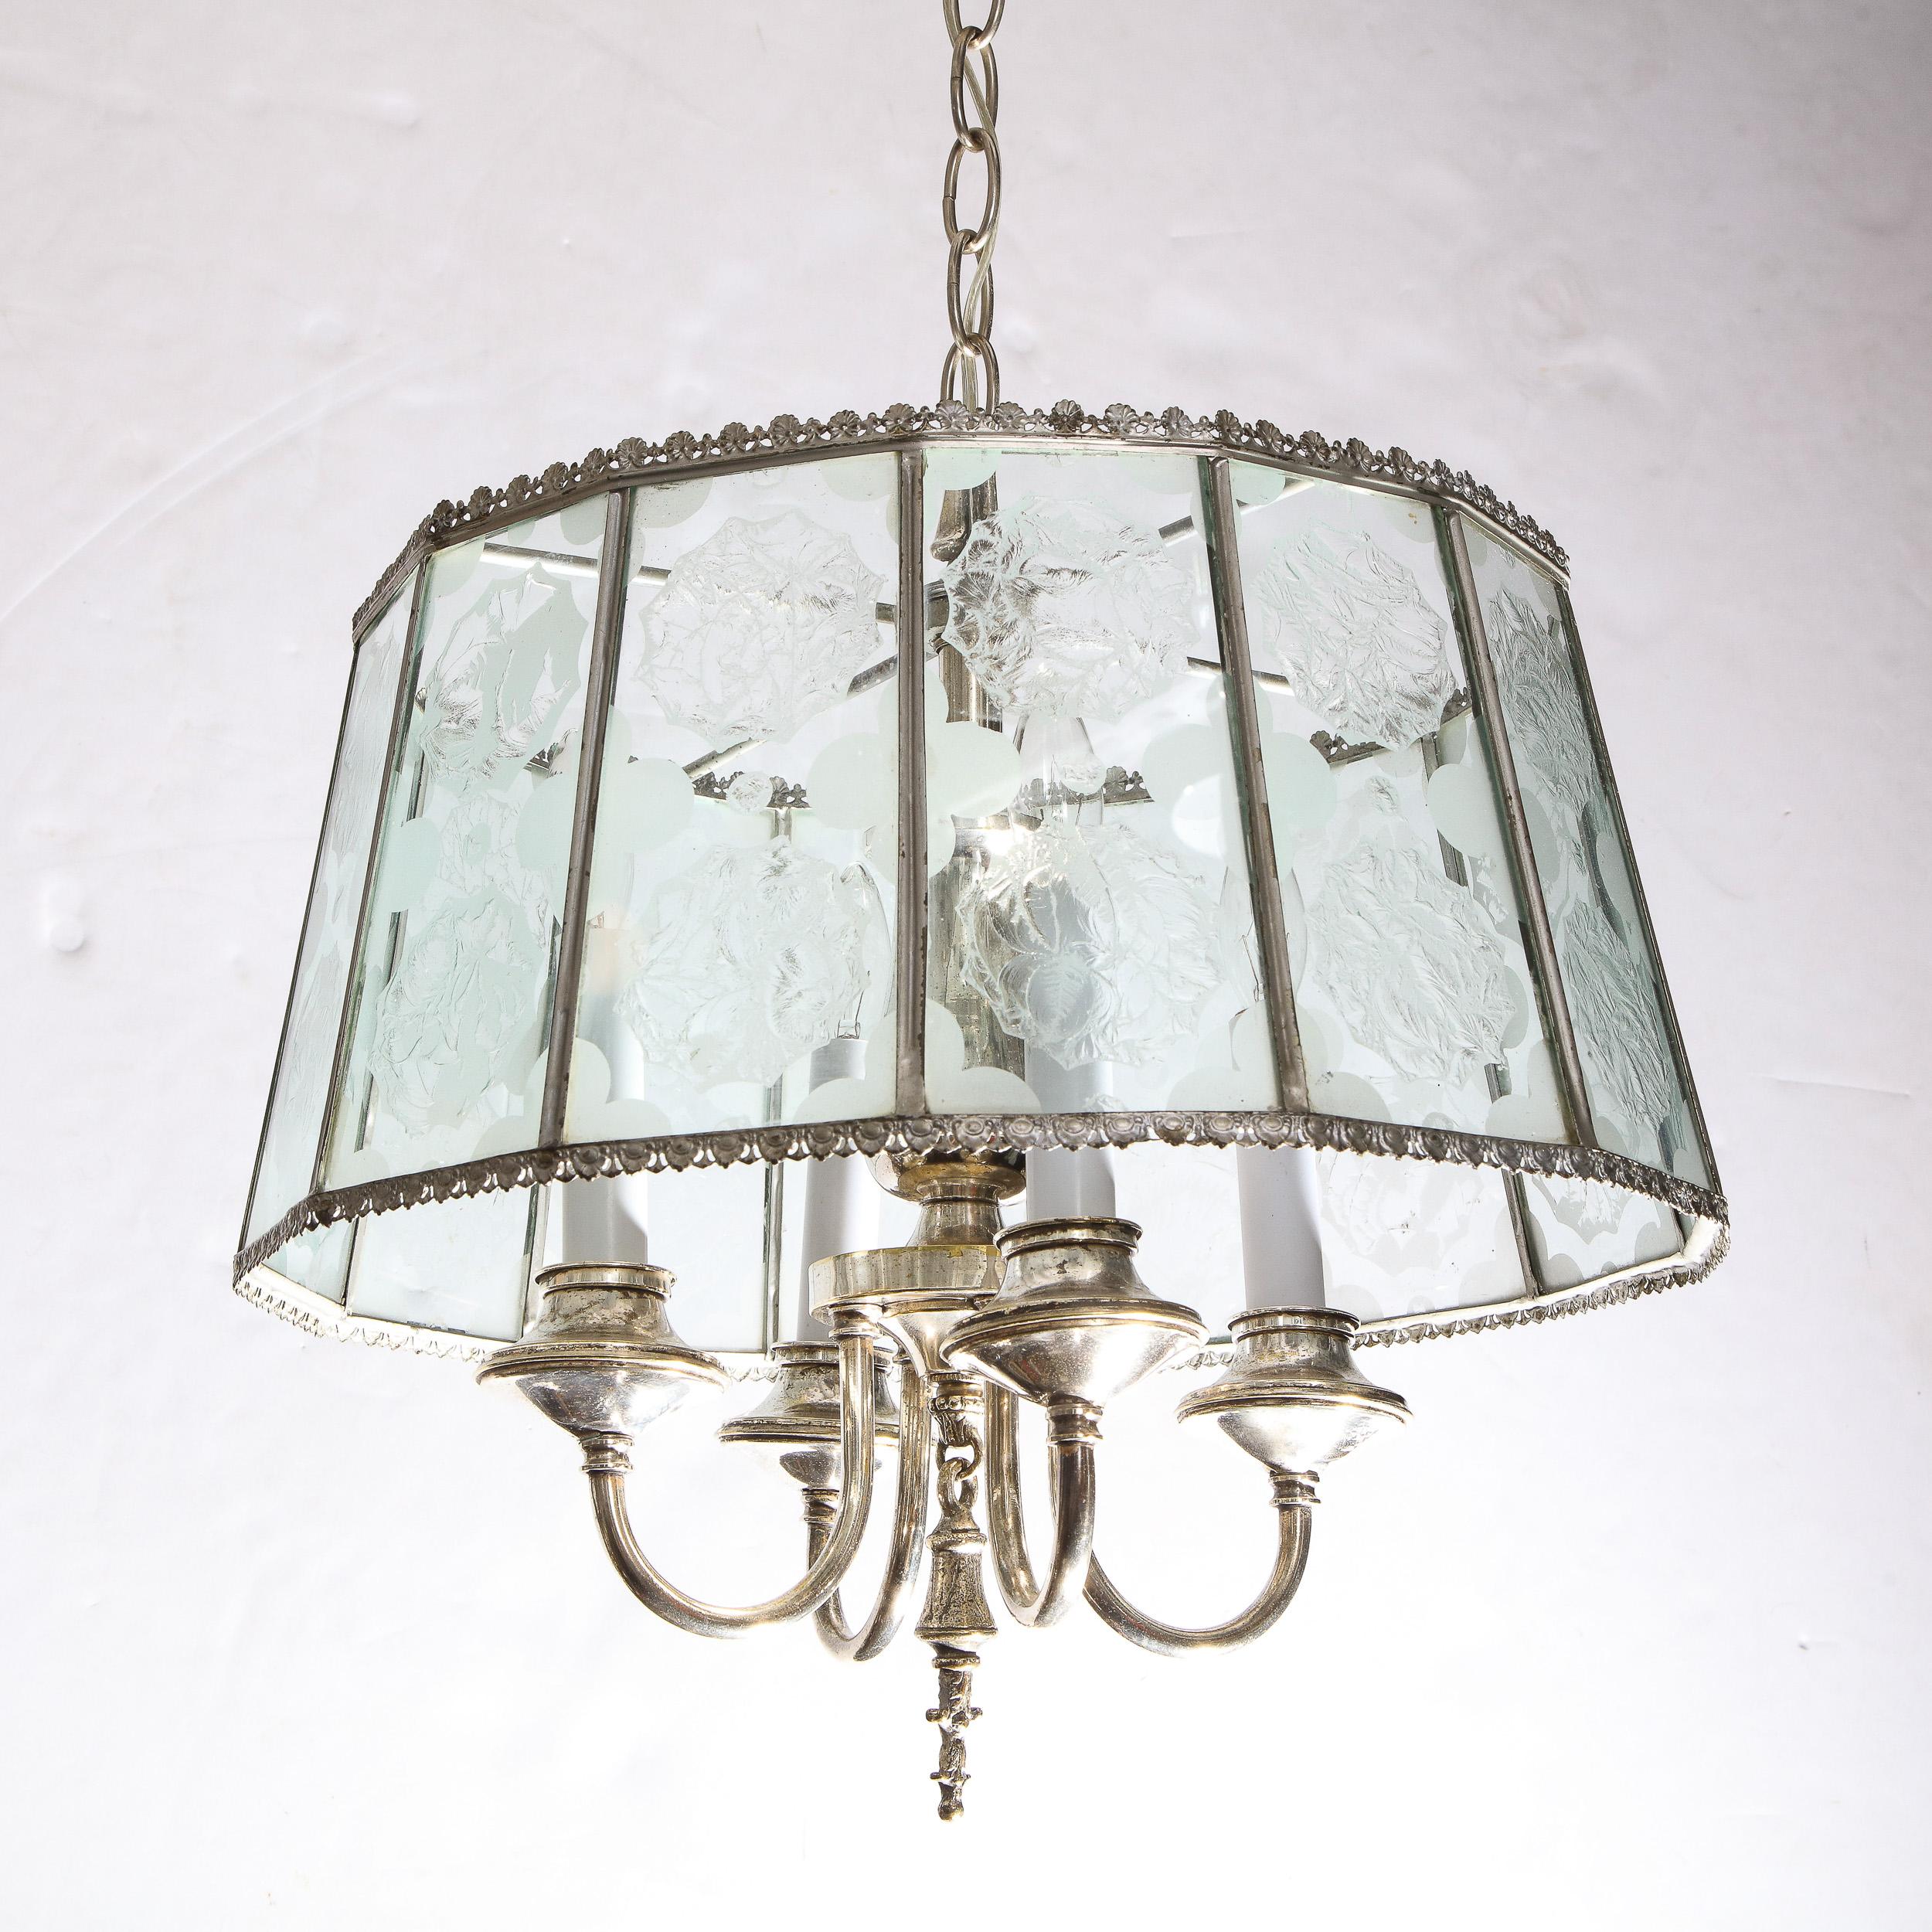 Art Deco Revival Lantern Translucent Glass Pendant with Silvered Fittings 3